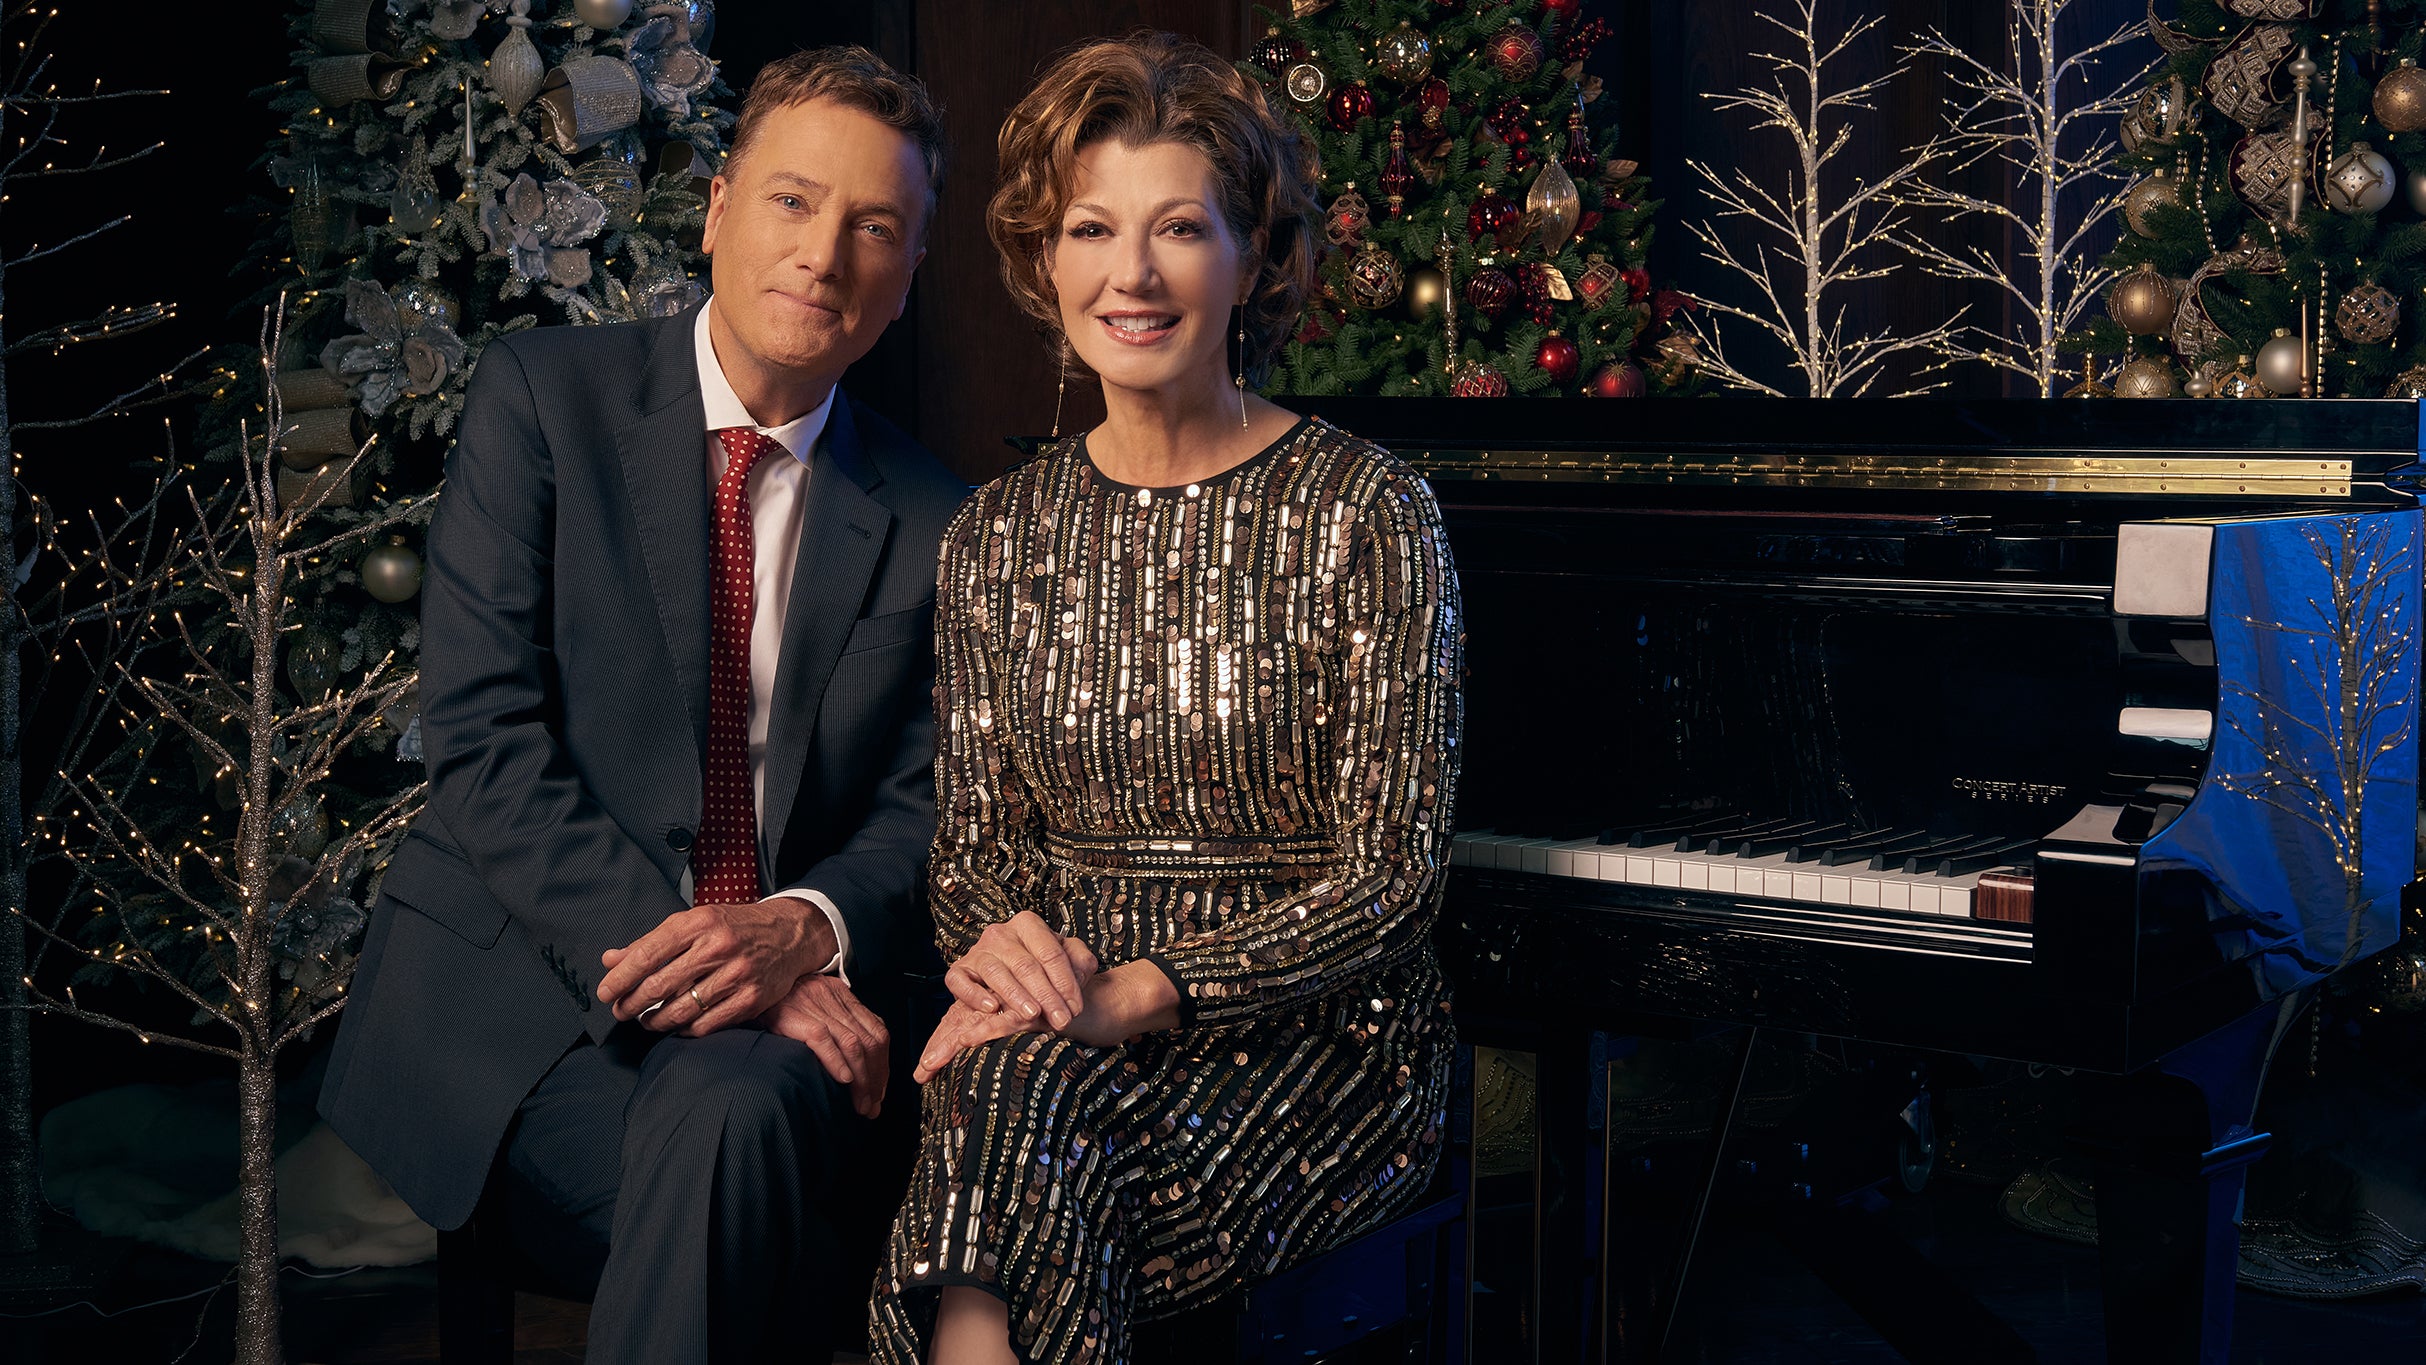 Amy Grant & Michael W. Smith - Christmas free presale code for performance tickets in Tysons, VA (Capital One Hall)